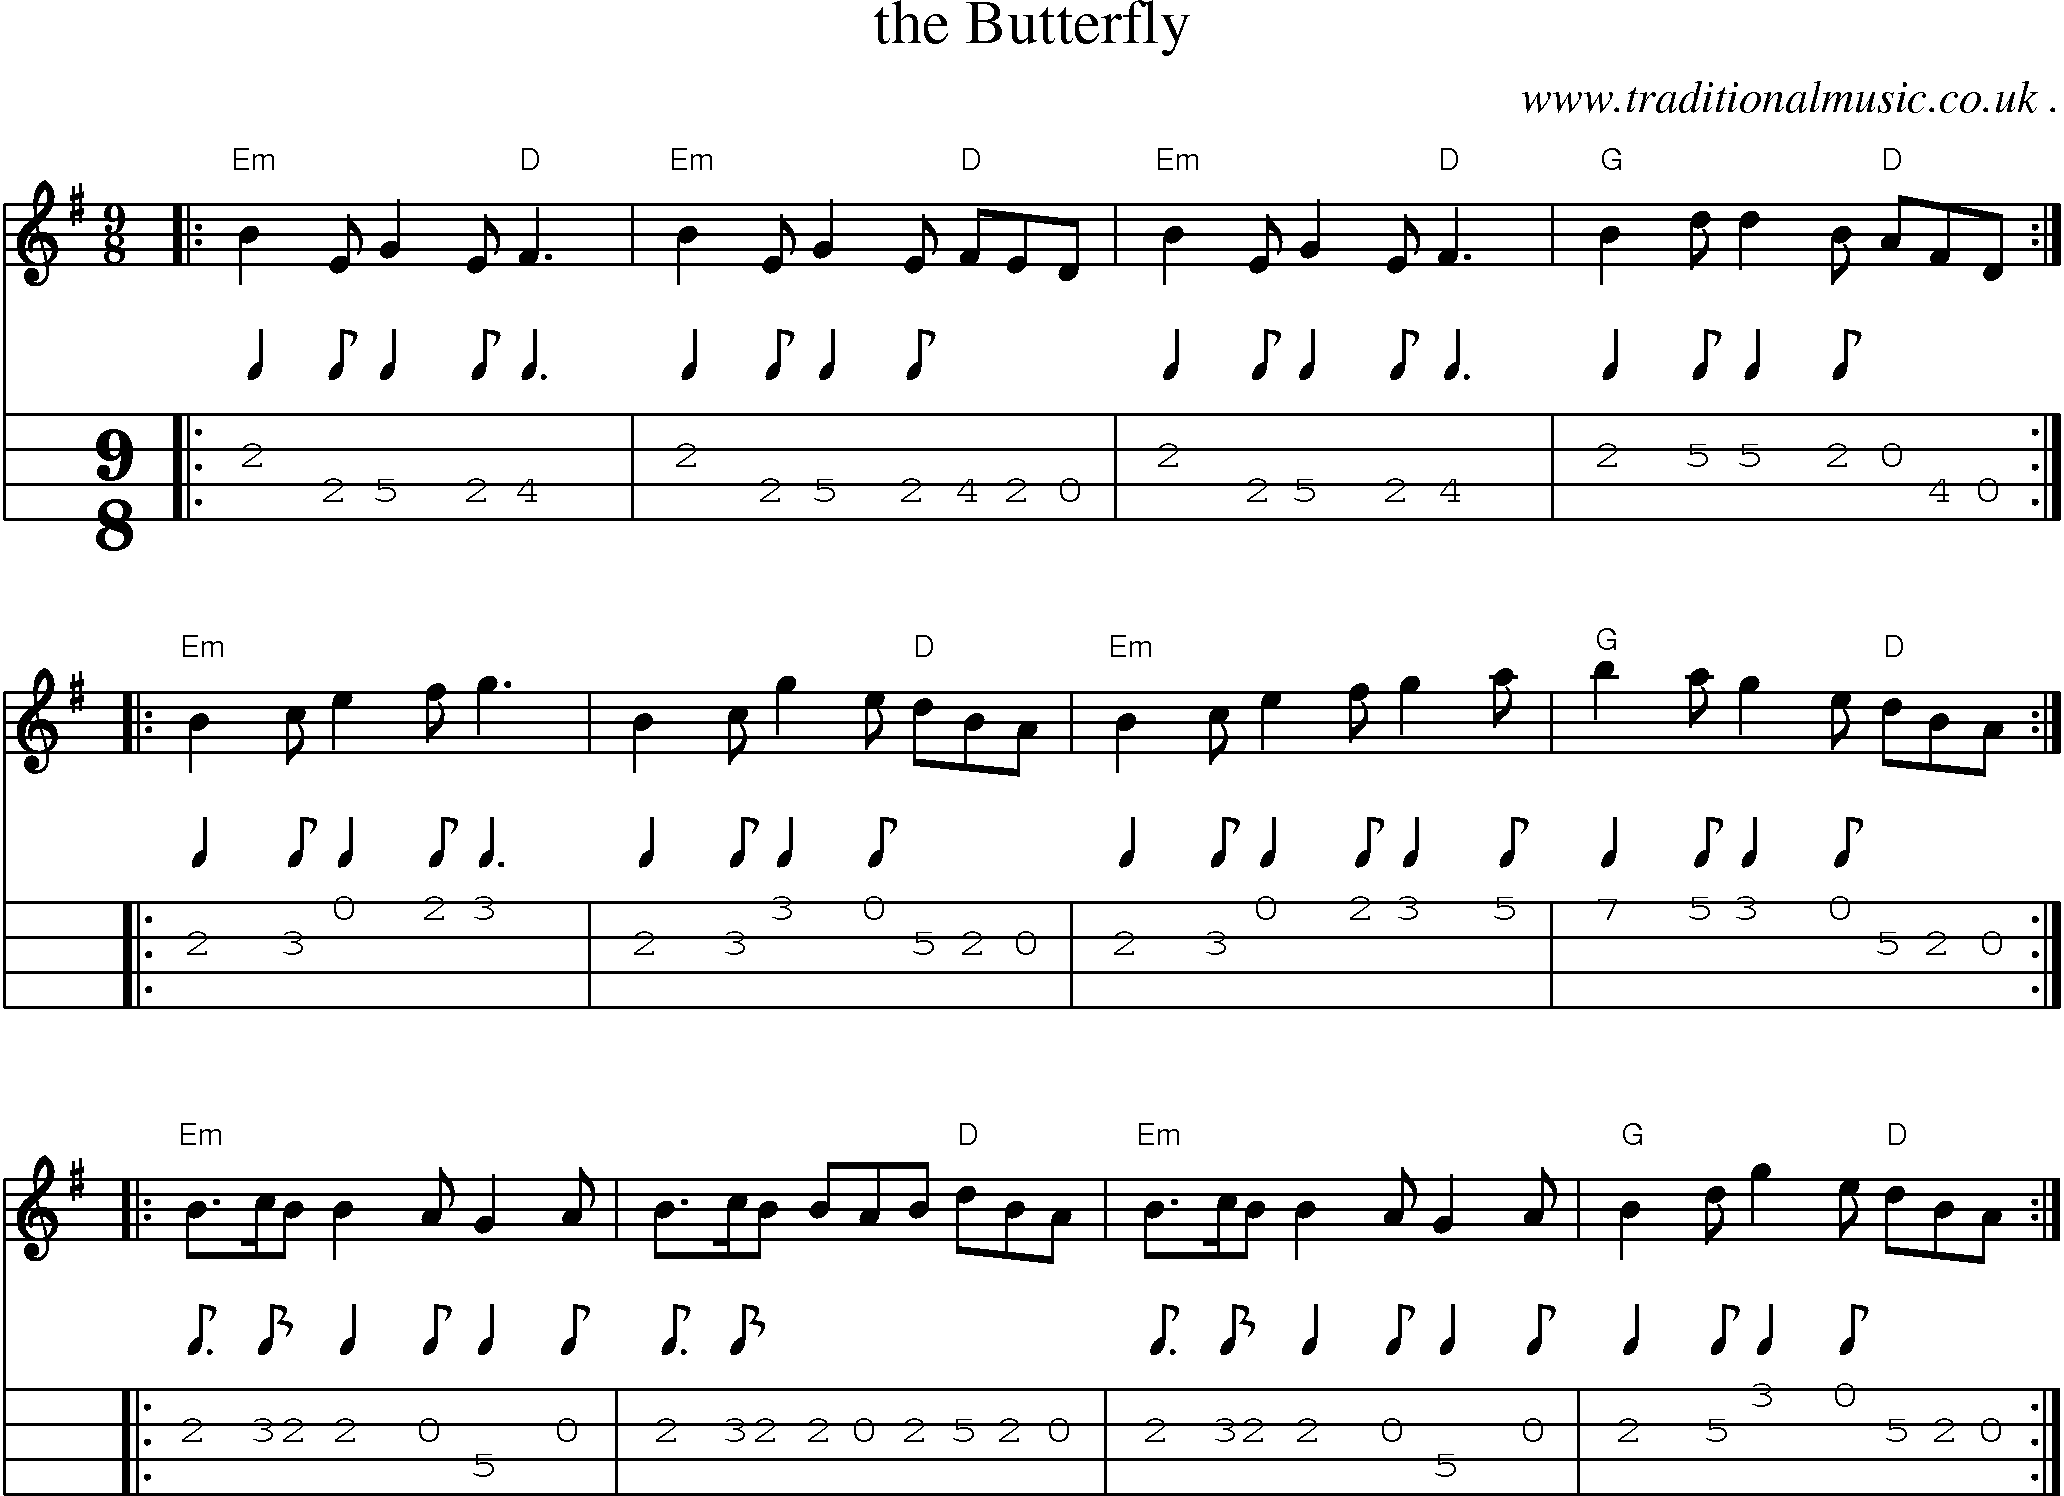 Sheet-music  score, Chords and Mandolin Tabs for The Butterfly